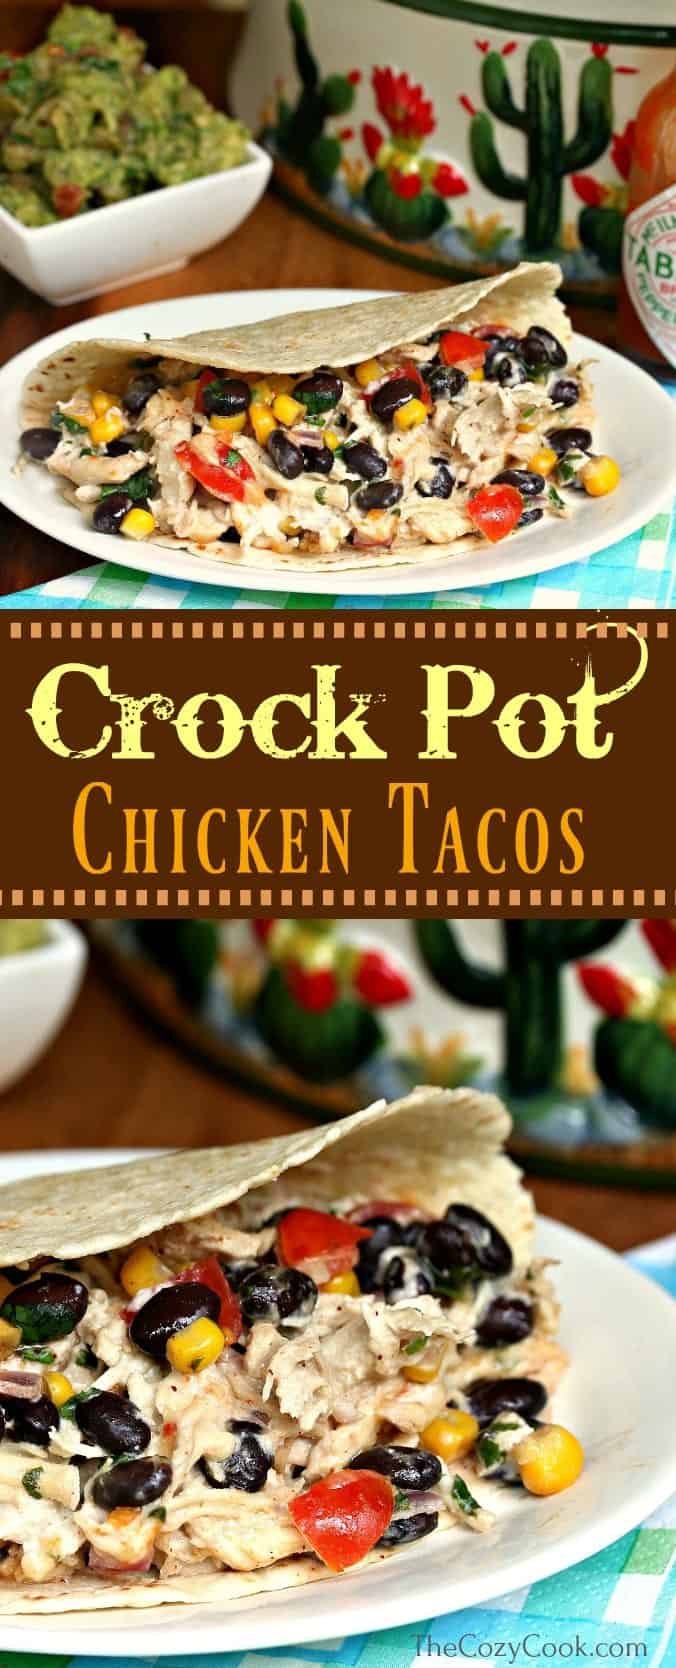 These crock pot chicken tacos are loaded with shredded chicken and a creamy taco mixture full of your favorite Mexican flavors! This is delicious over lettuce wraps, rice, or taco shells! | The Cozy Cook | #Tacos #Chicken #CrockPot #SlowCooker #Mexican #Dinner #TacoTuesday #ShreddedChicken #BlackBeans